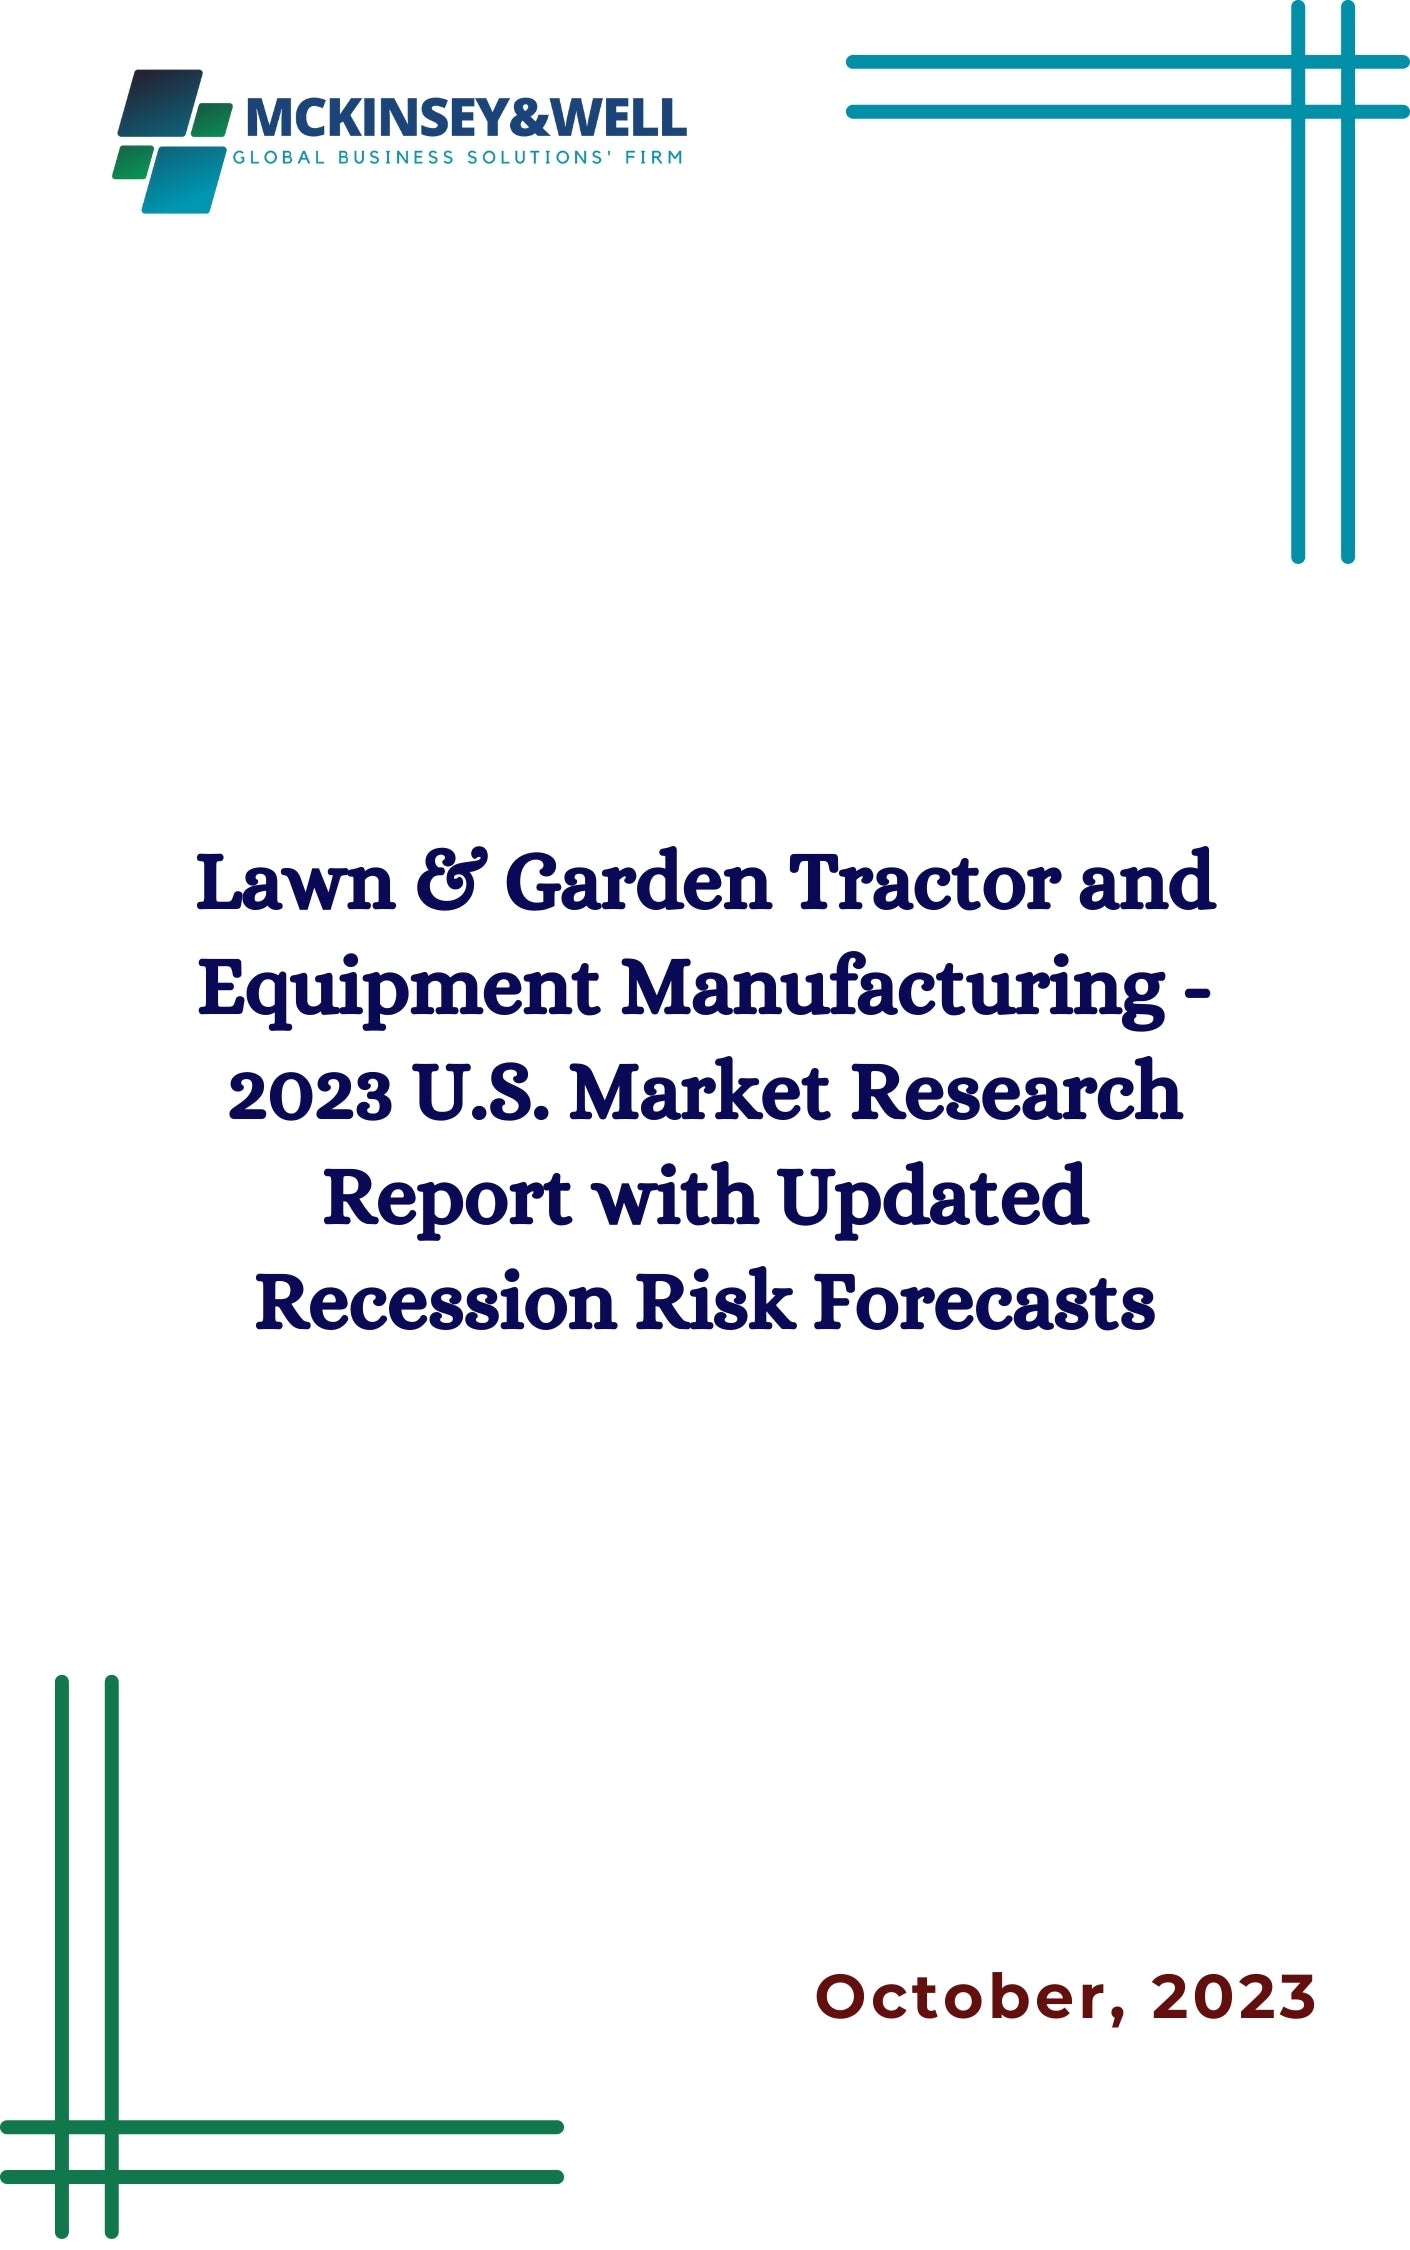 Lawn & Garden Tractor and Equipment Manufacturing - 2023 U.S. Market Research Report with Updated Recession Risk Forecasts